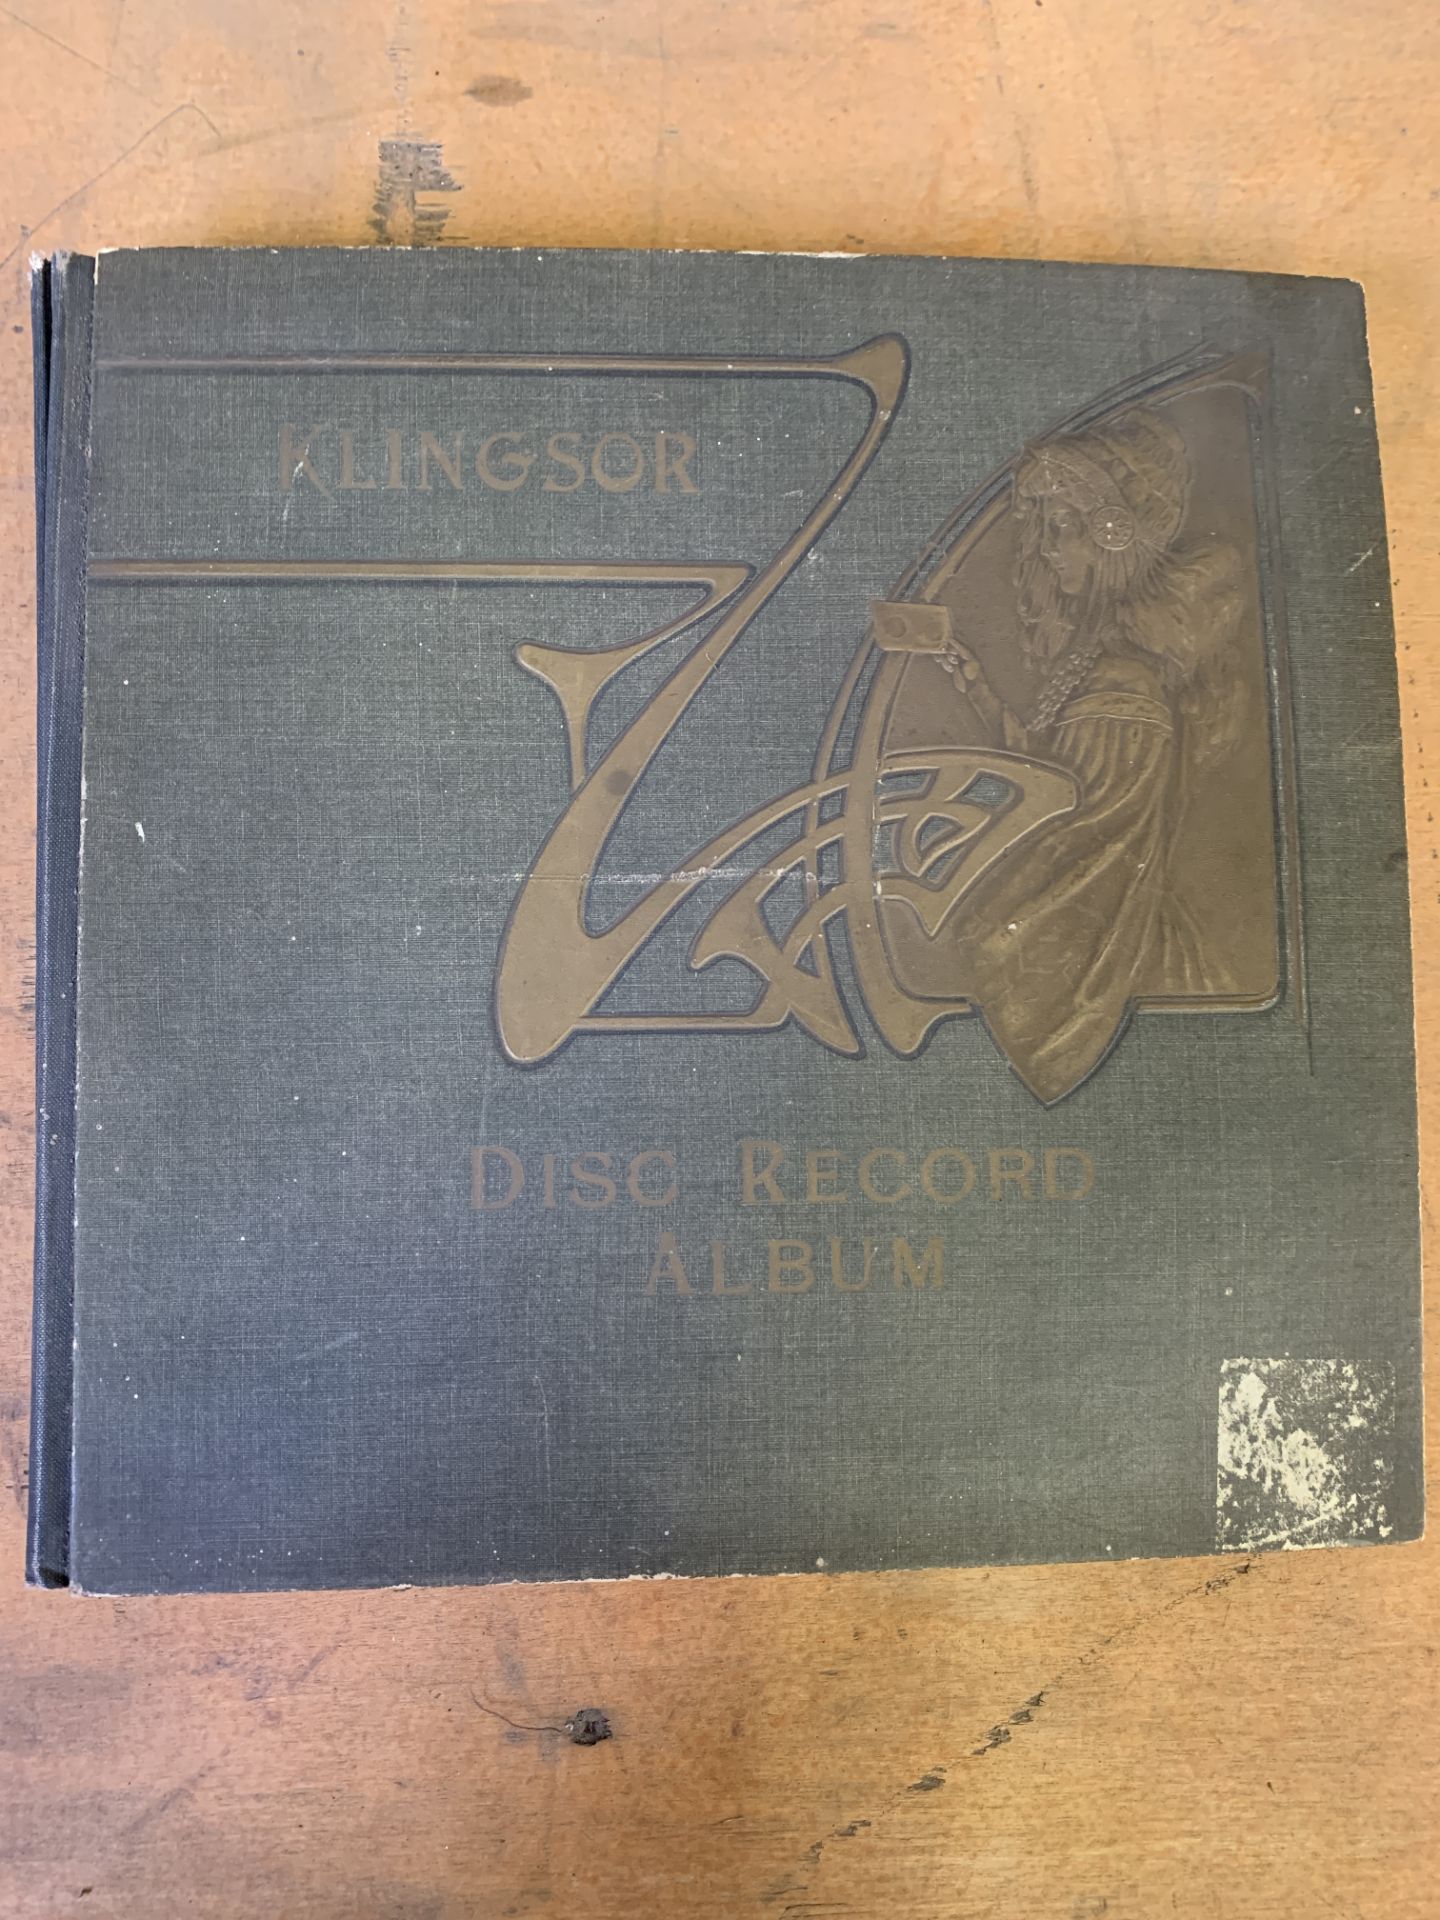 Klingsor Disc Record Album of shellac records and other records